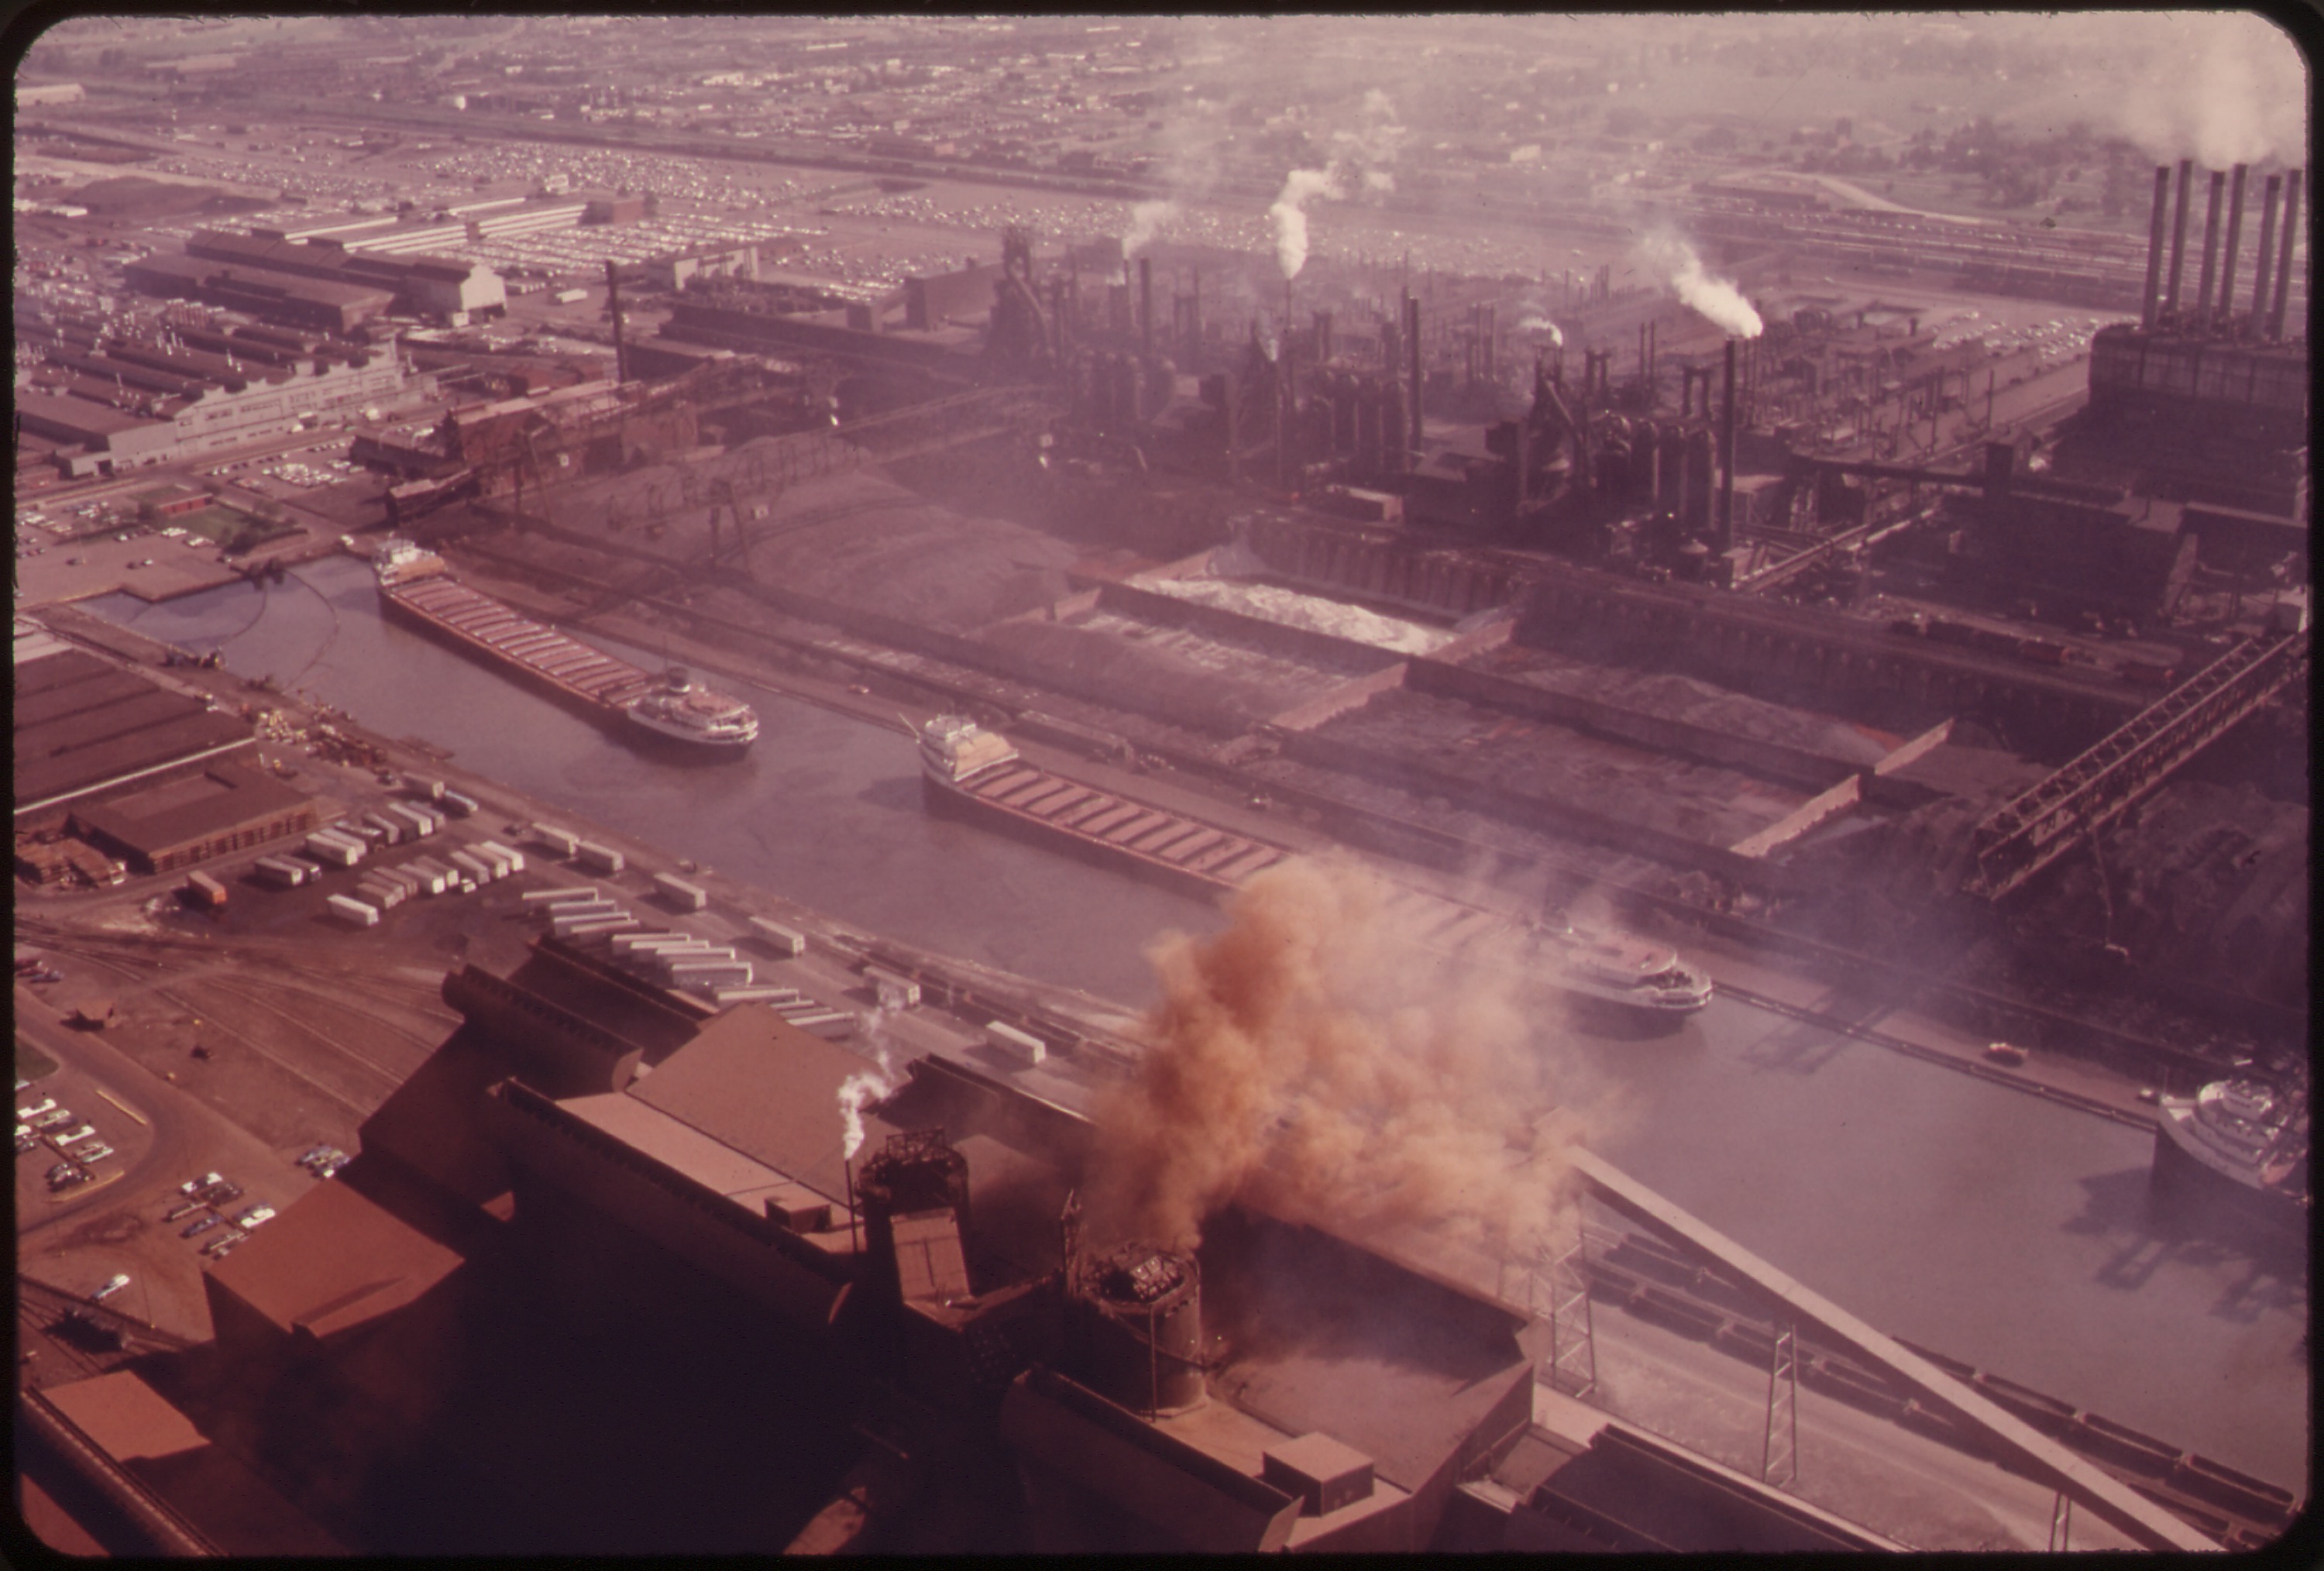 Boiler explosion at the ford rouge plant #4